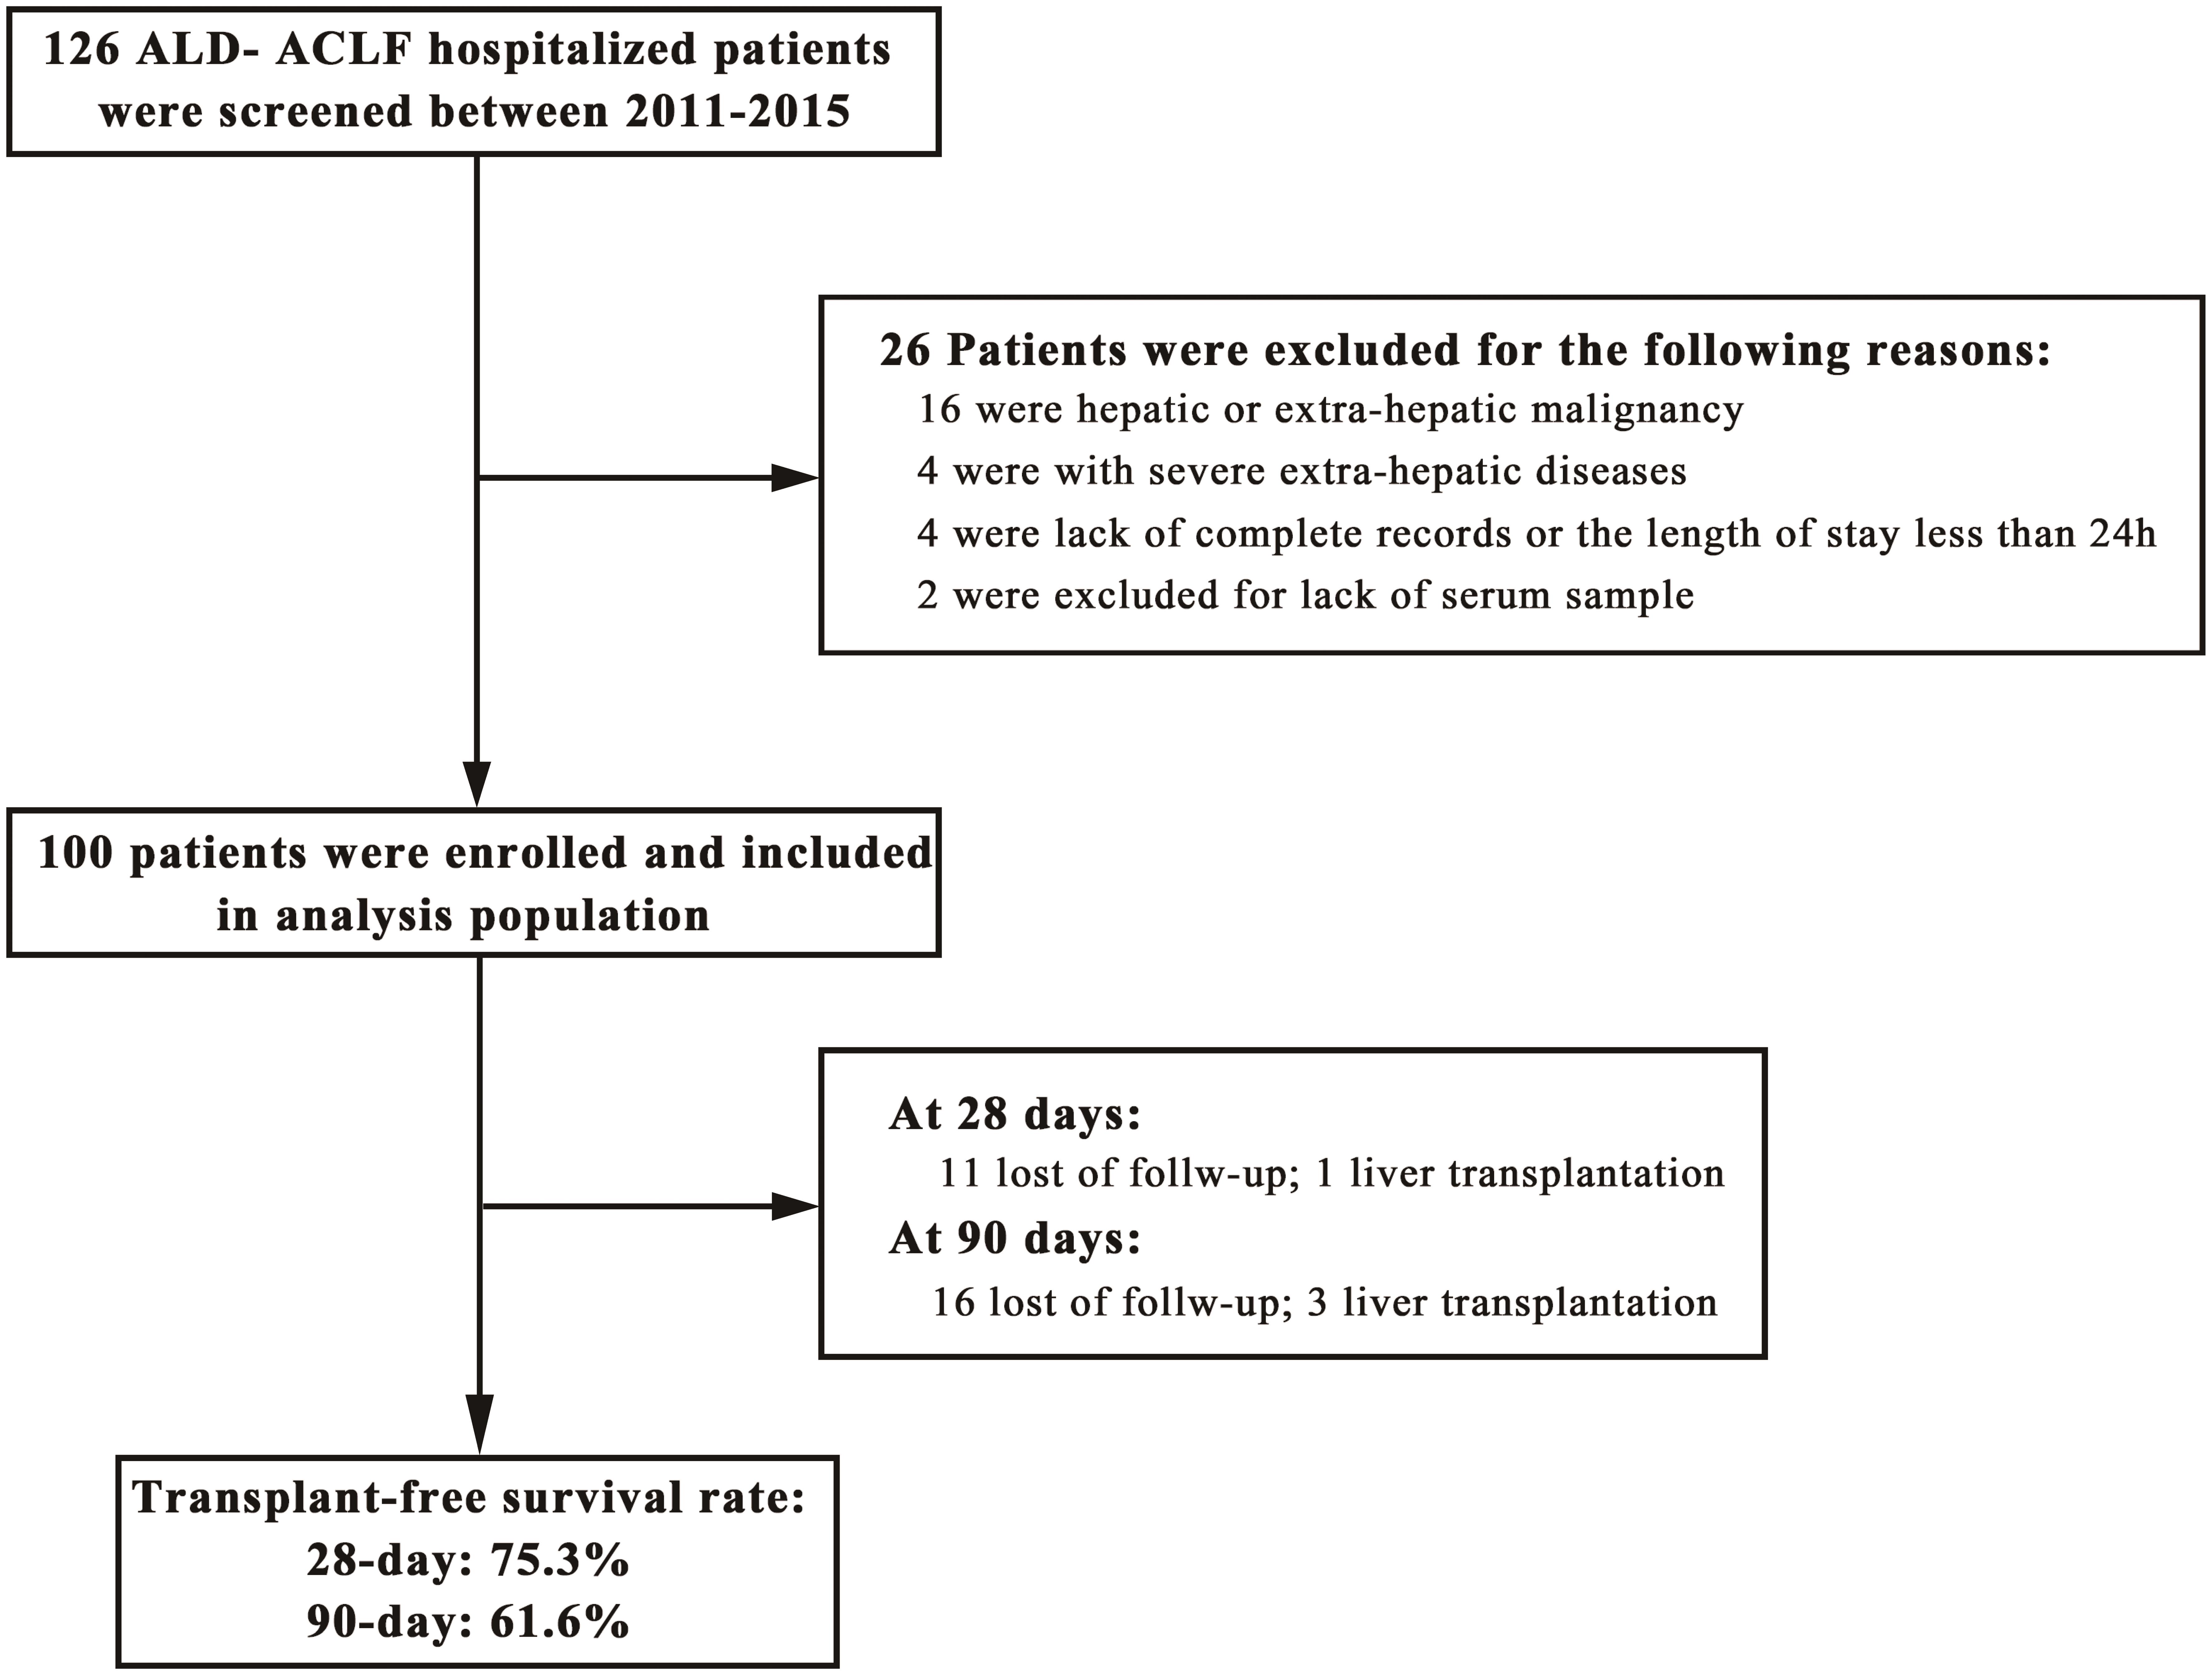 Flowchart of screening and recruitment of patients with ALD-ACLF.